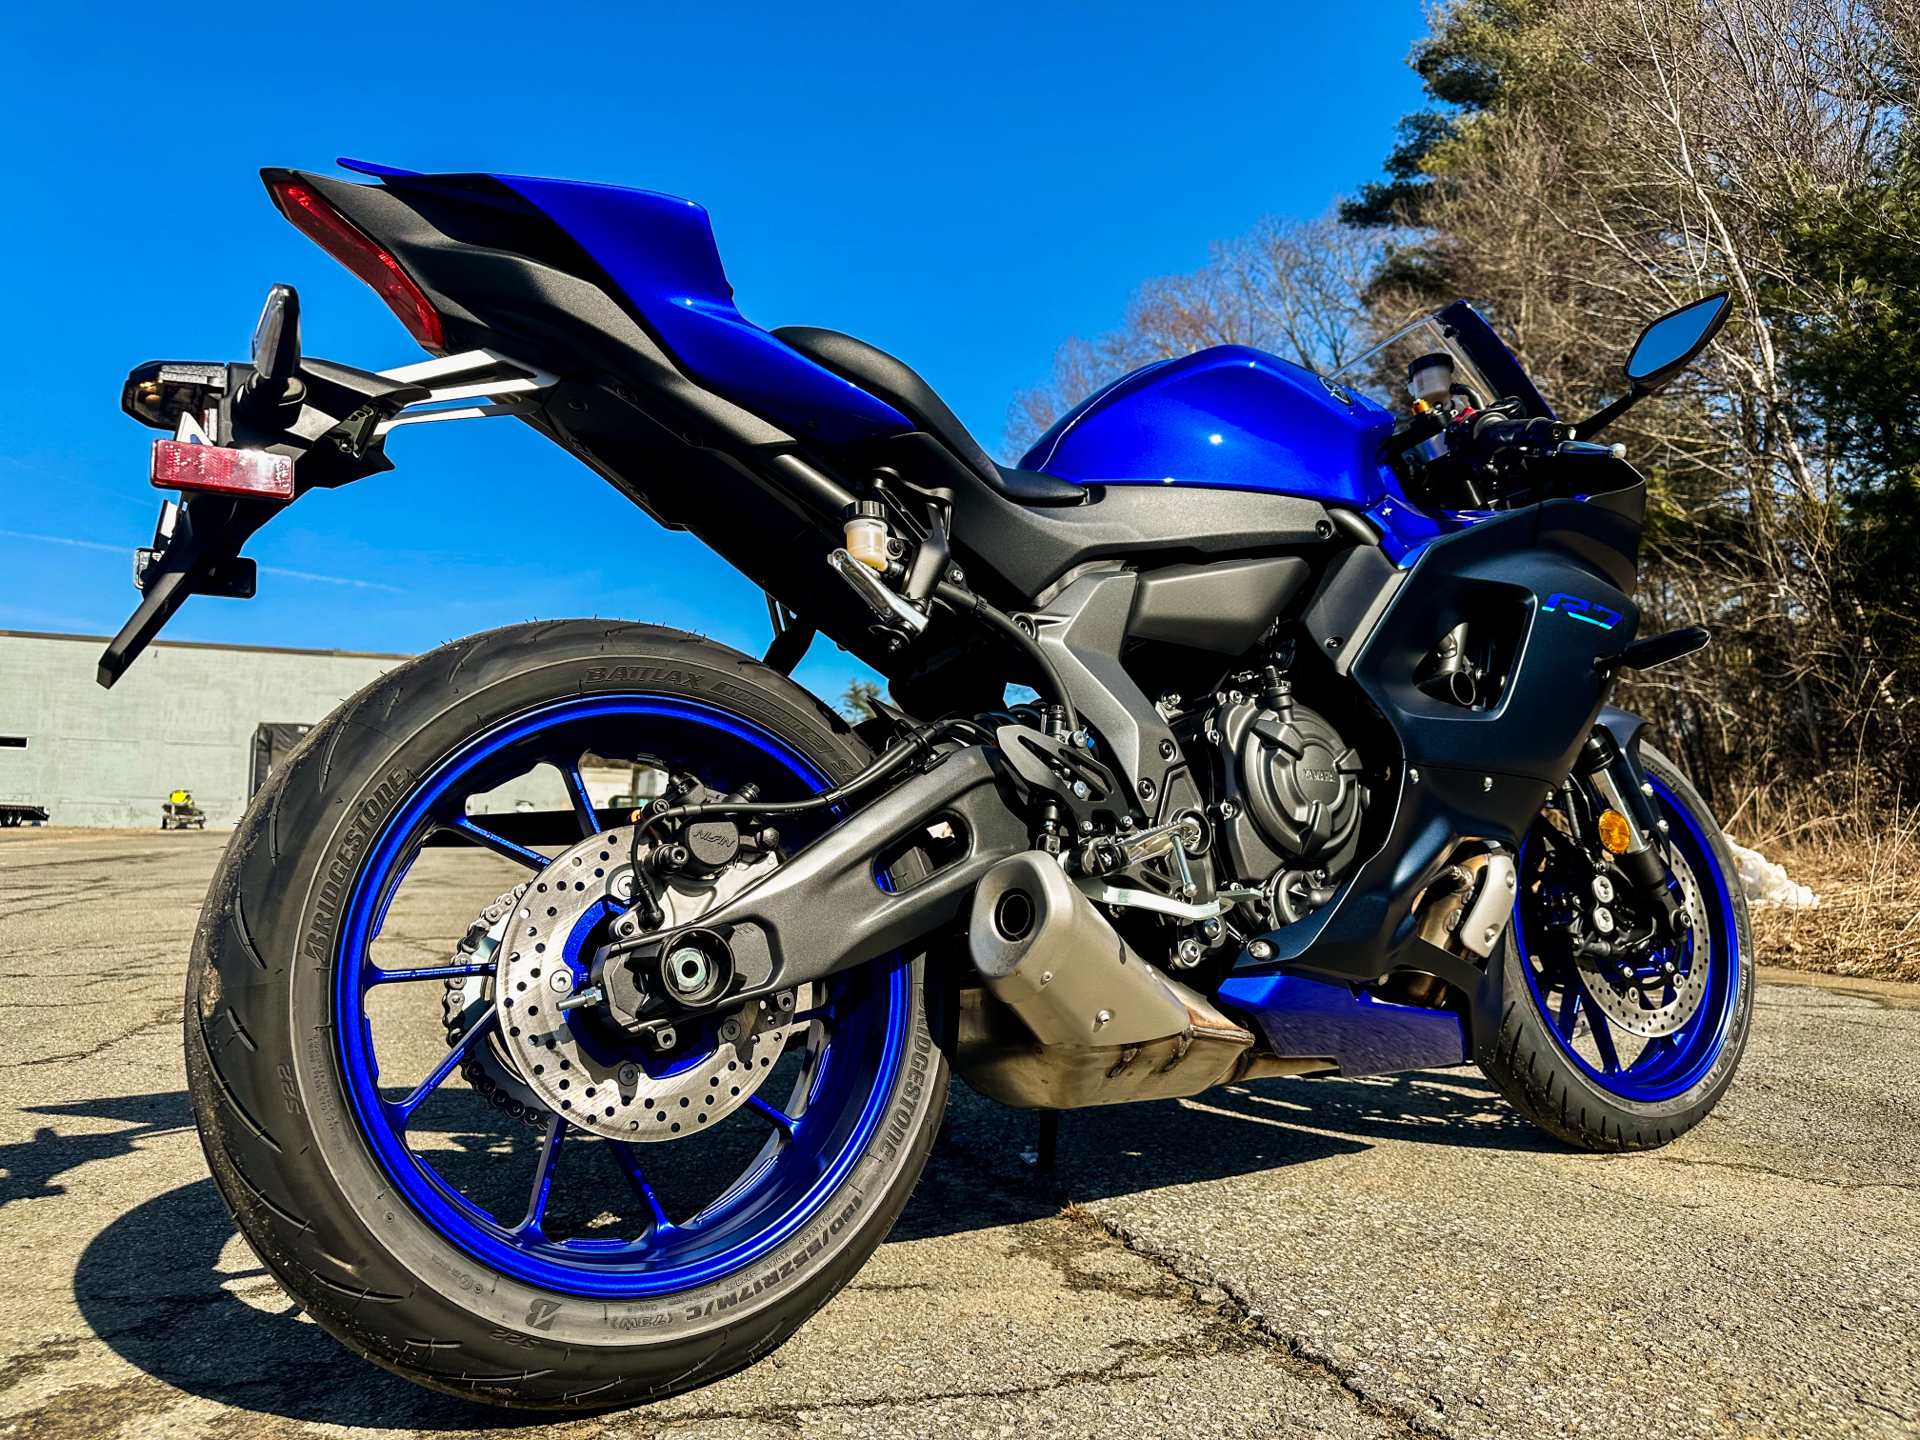 2023 Yamaha YZF-R7 in Concord, New Hampshire - Photo 34